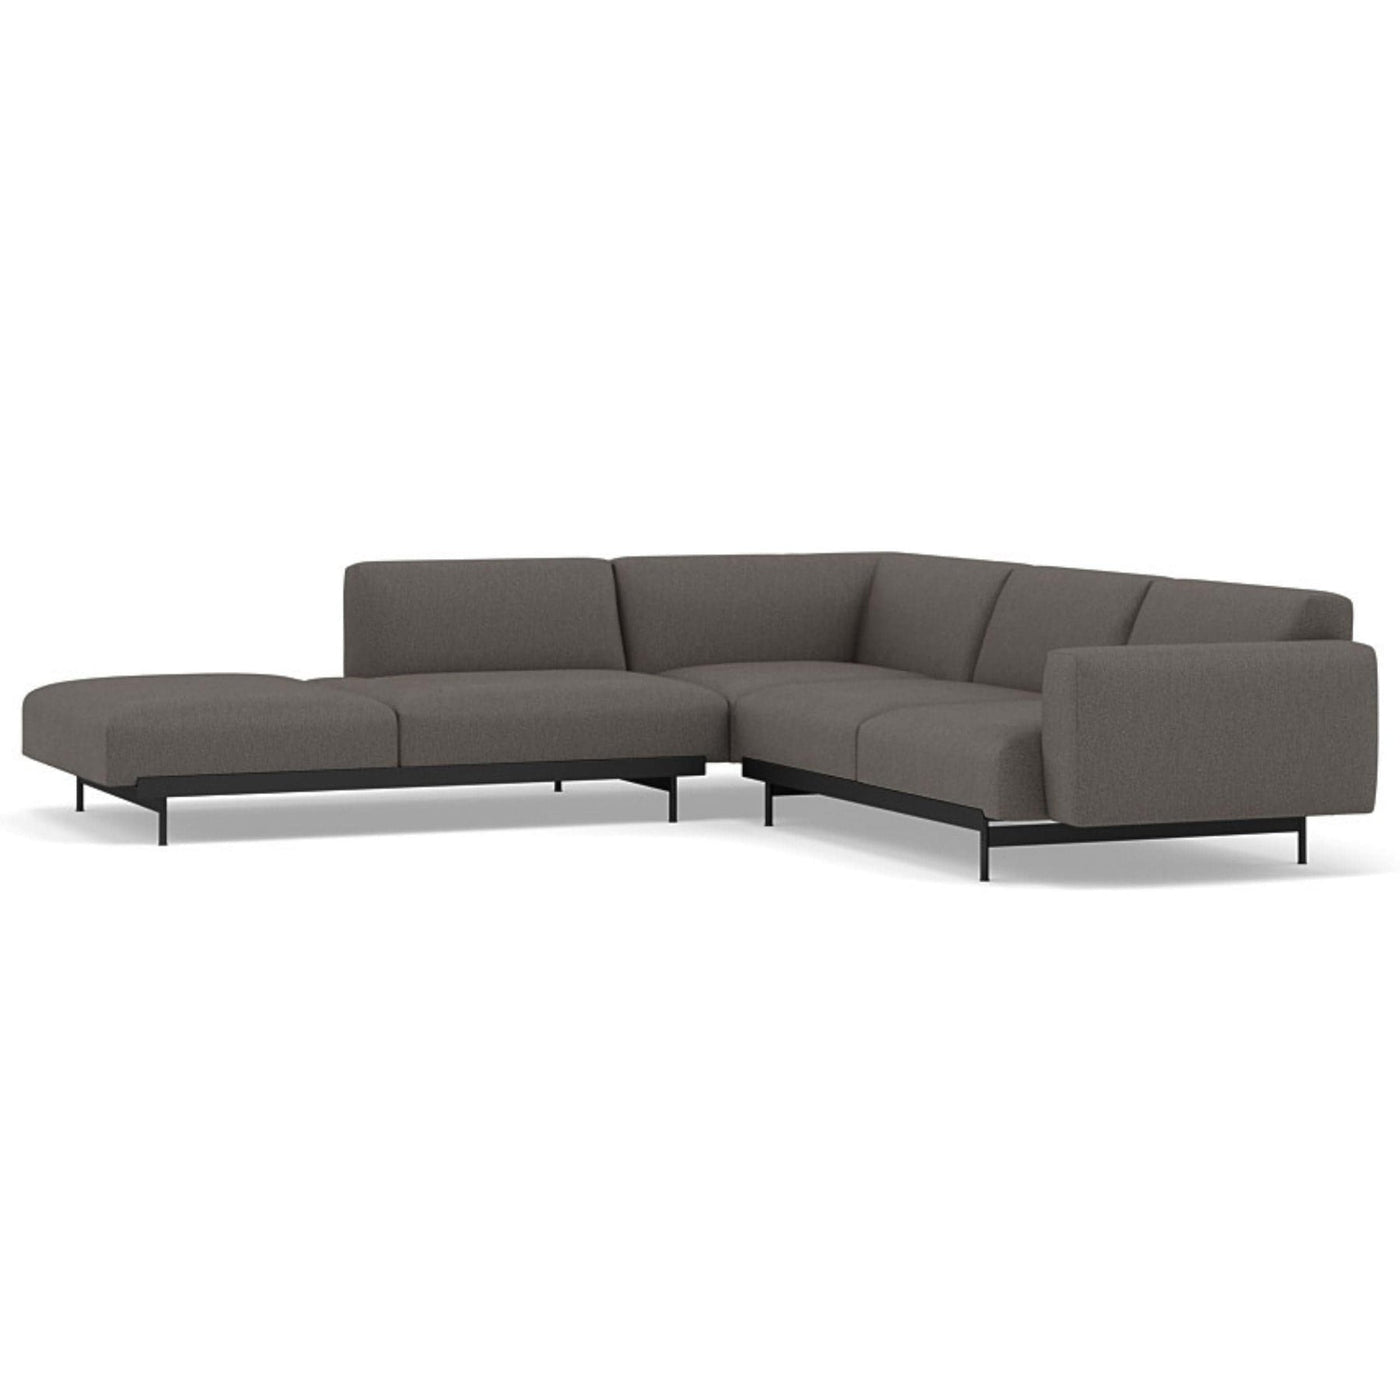 Muuto In Situ Modular Corner Sofa. Made to order  from someday designs. #colour_clay-9